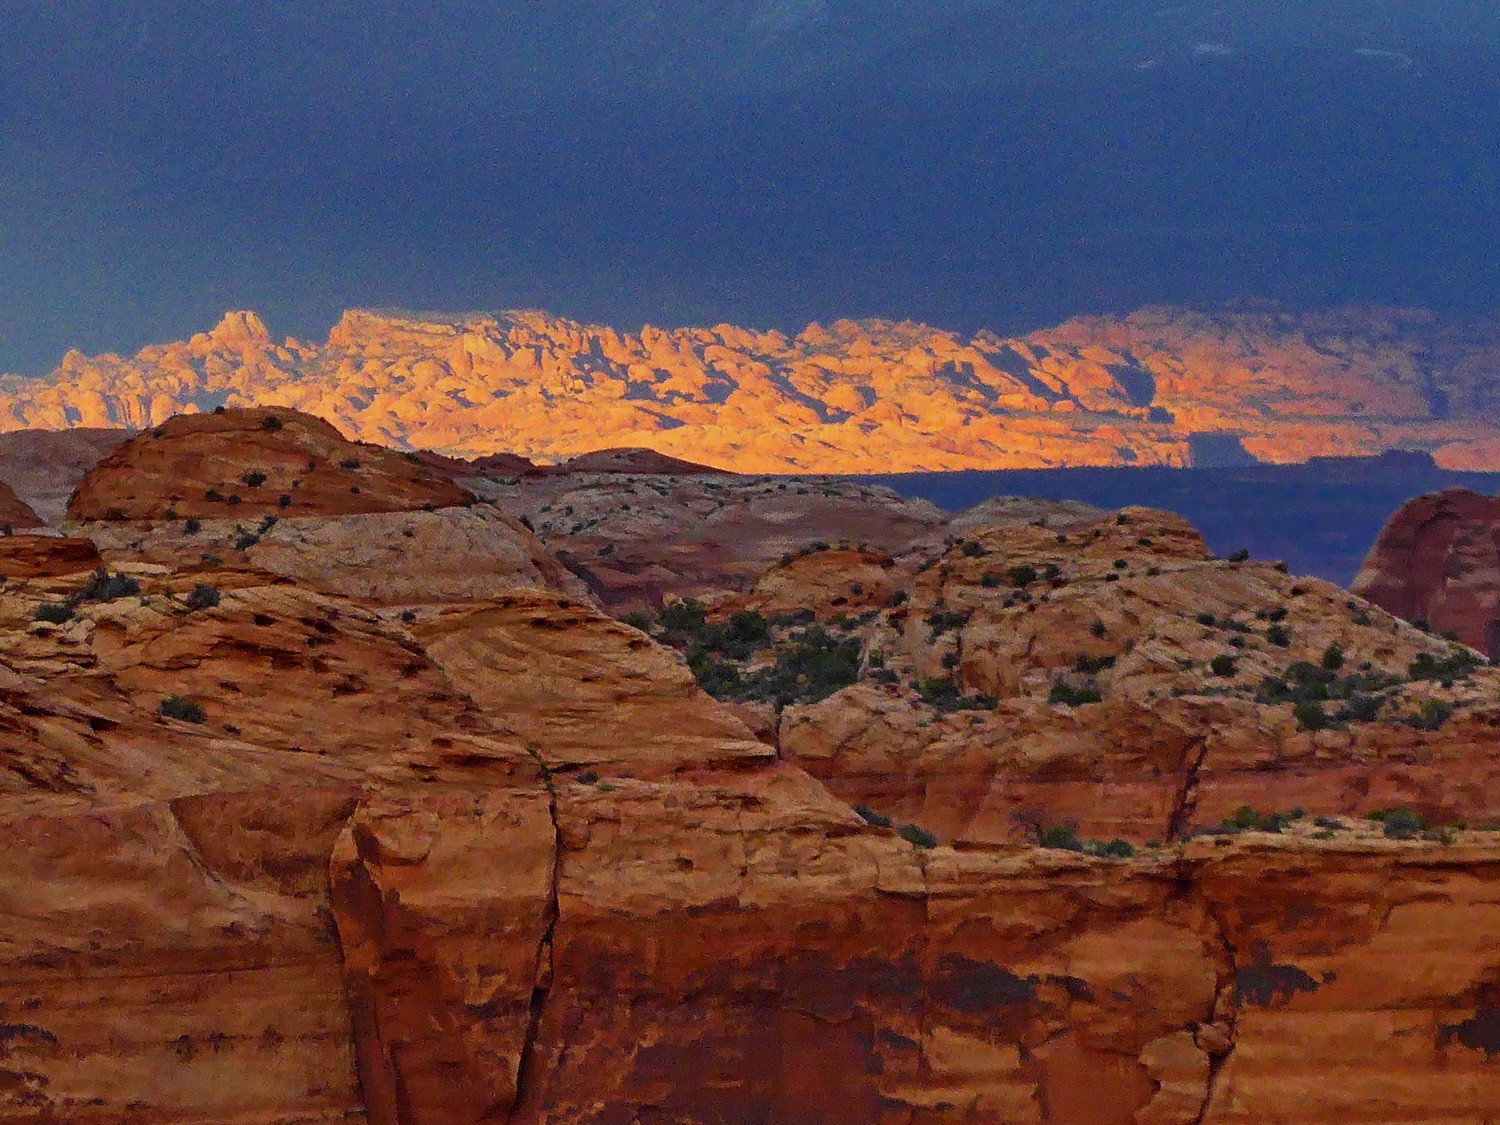 Sunset in the Canyonlands National Park